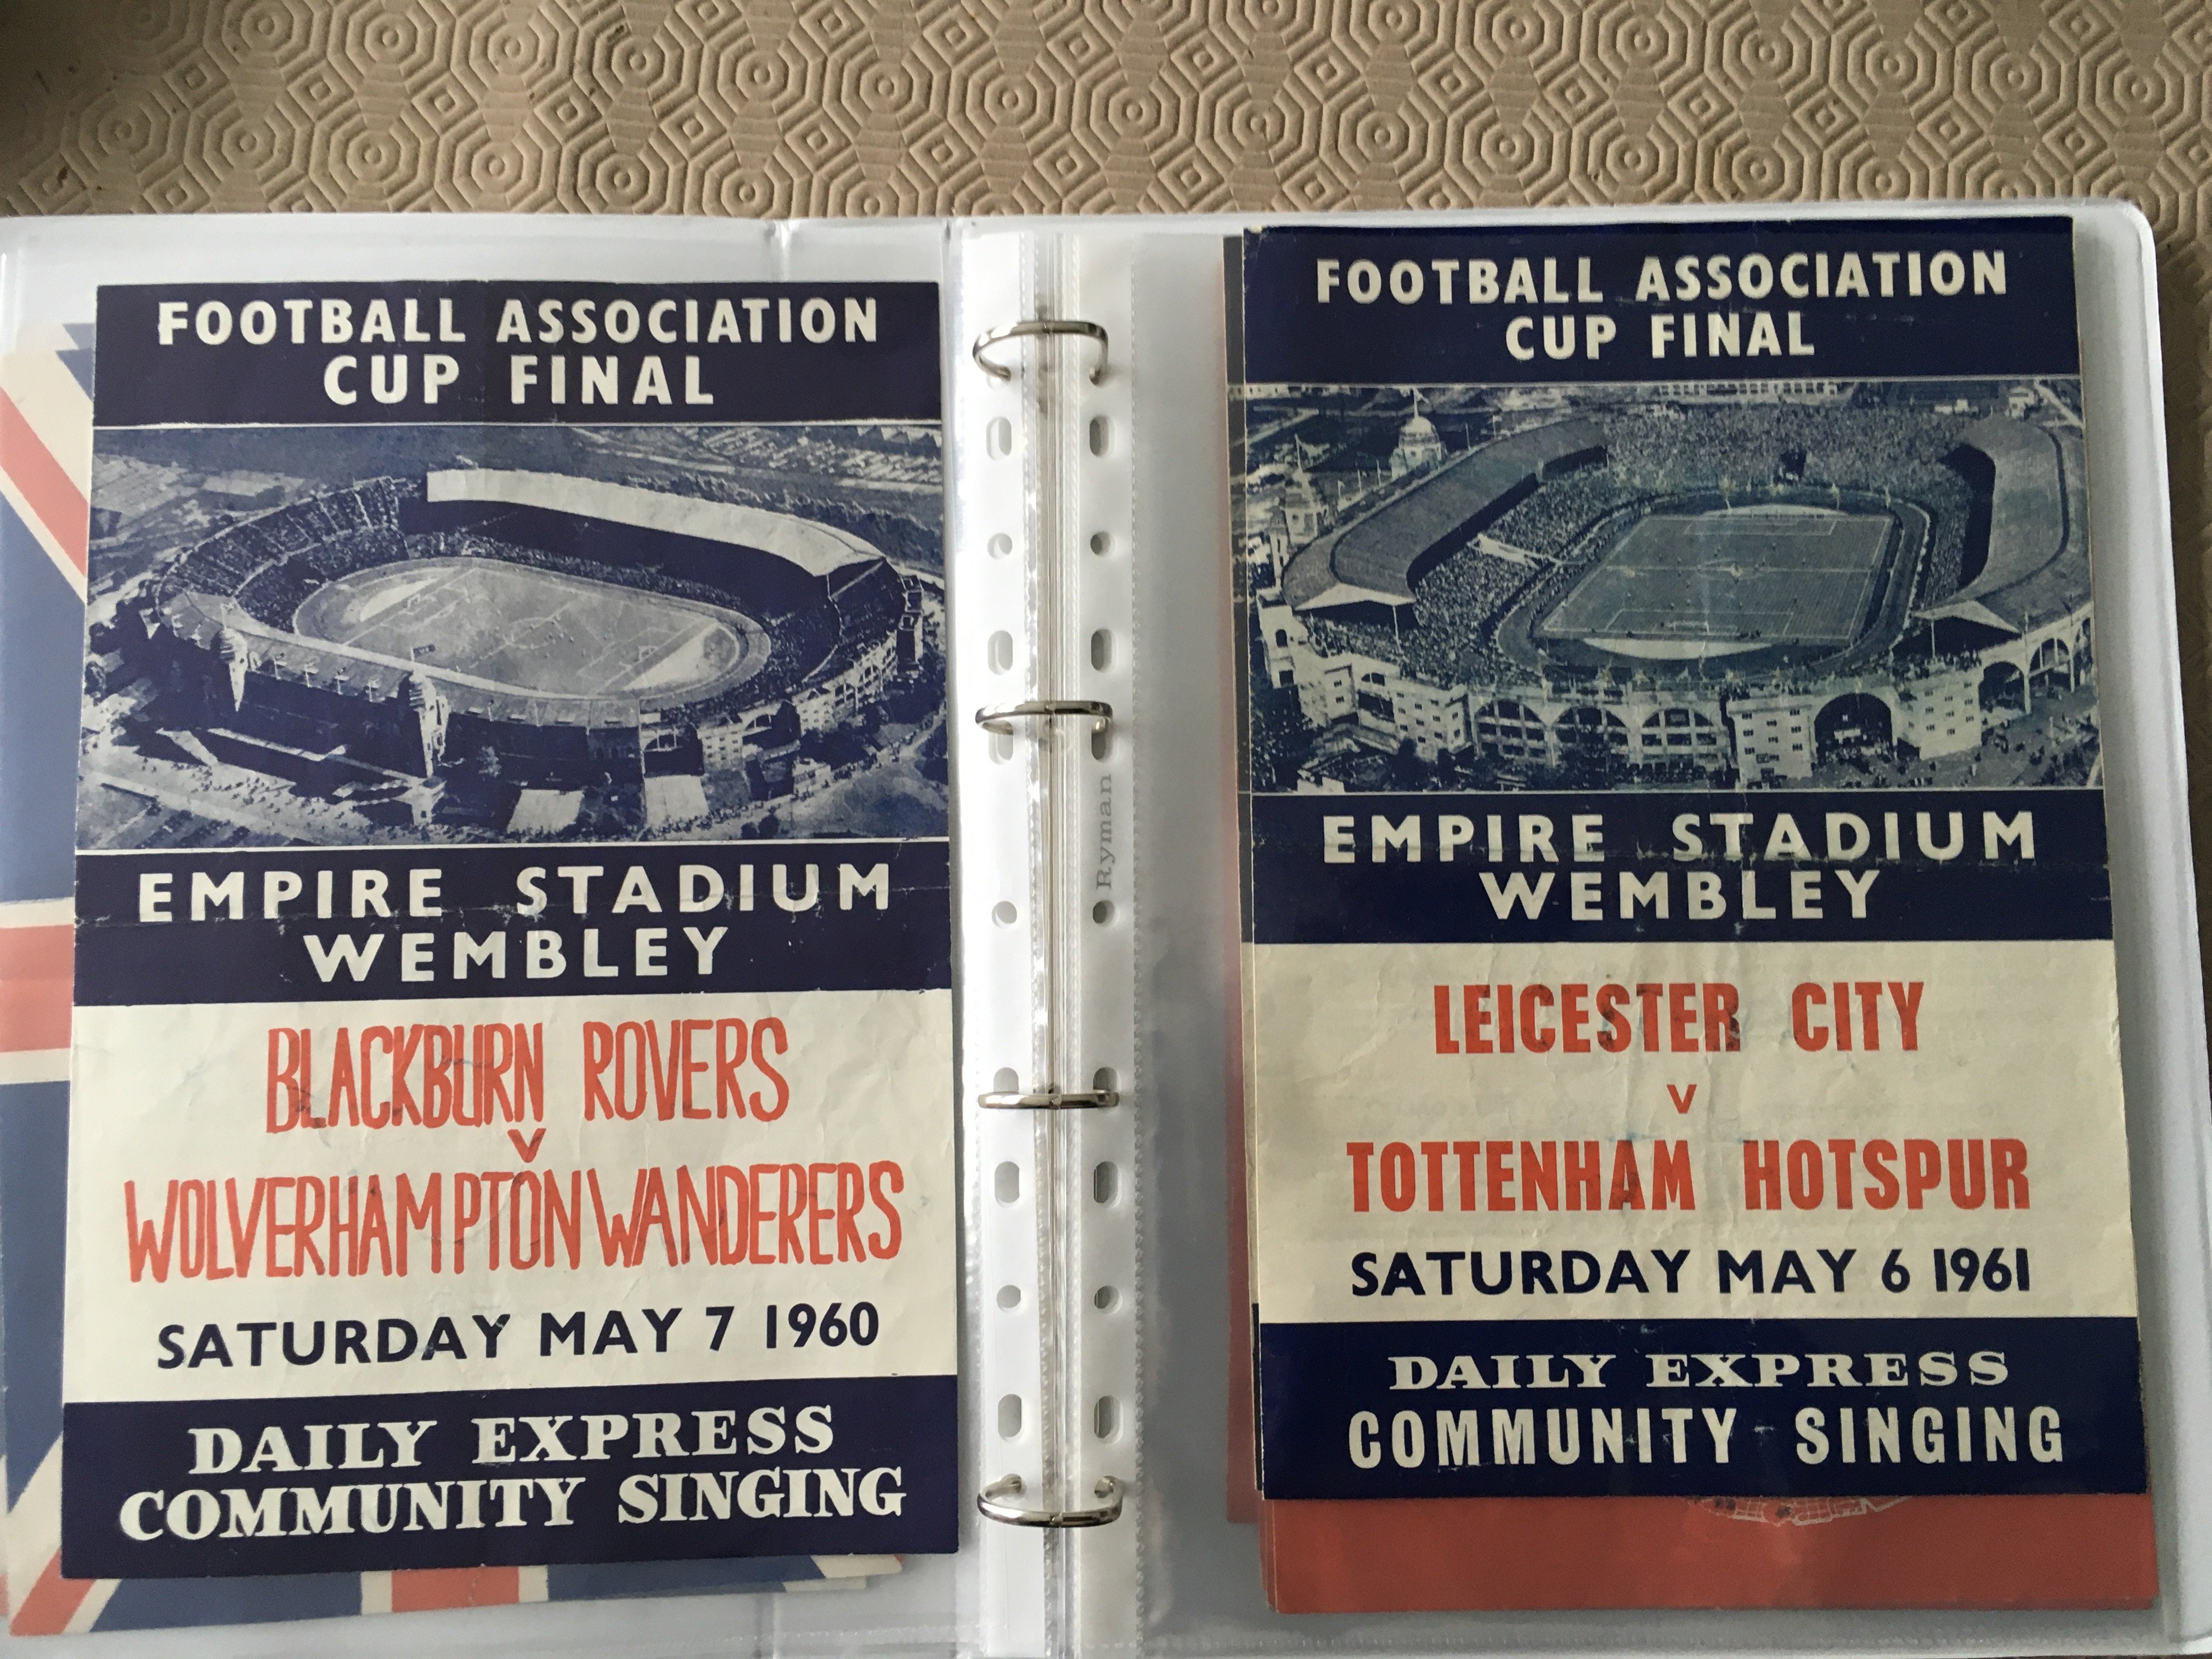 FA Cup Final Football Songsheets: Includes 57 58 60 61 62 64 65 66 67 69 and 71 which was the - Image 2 of 2